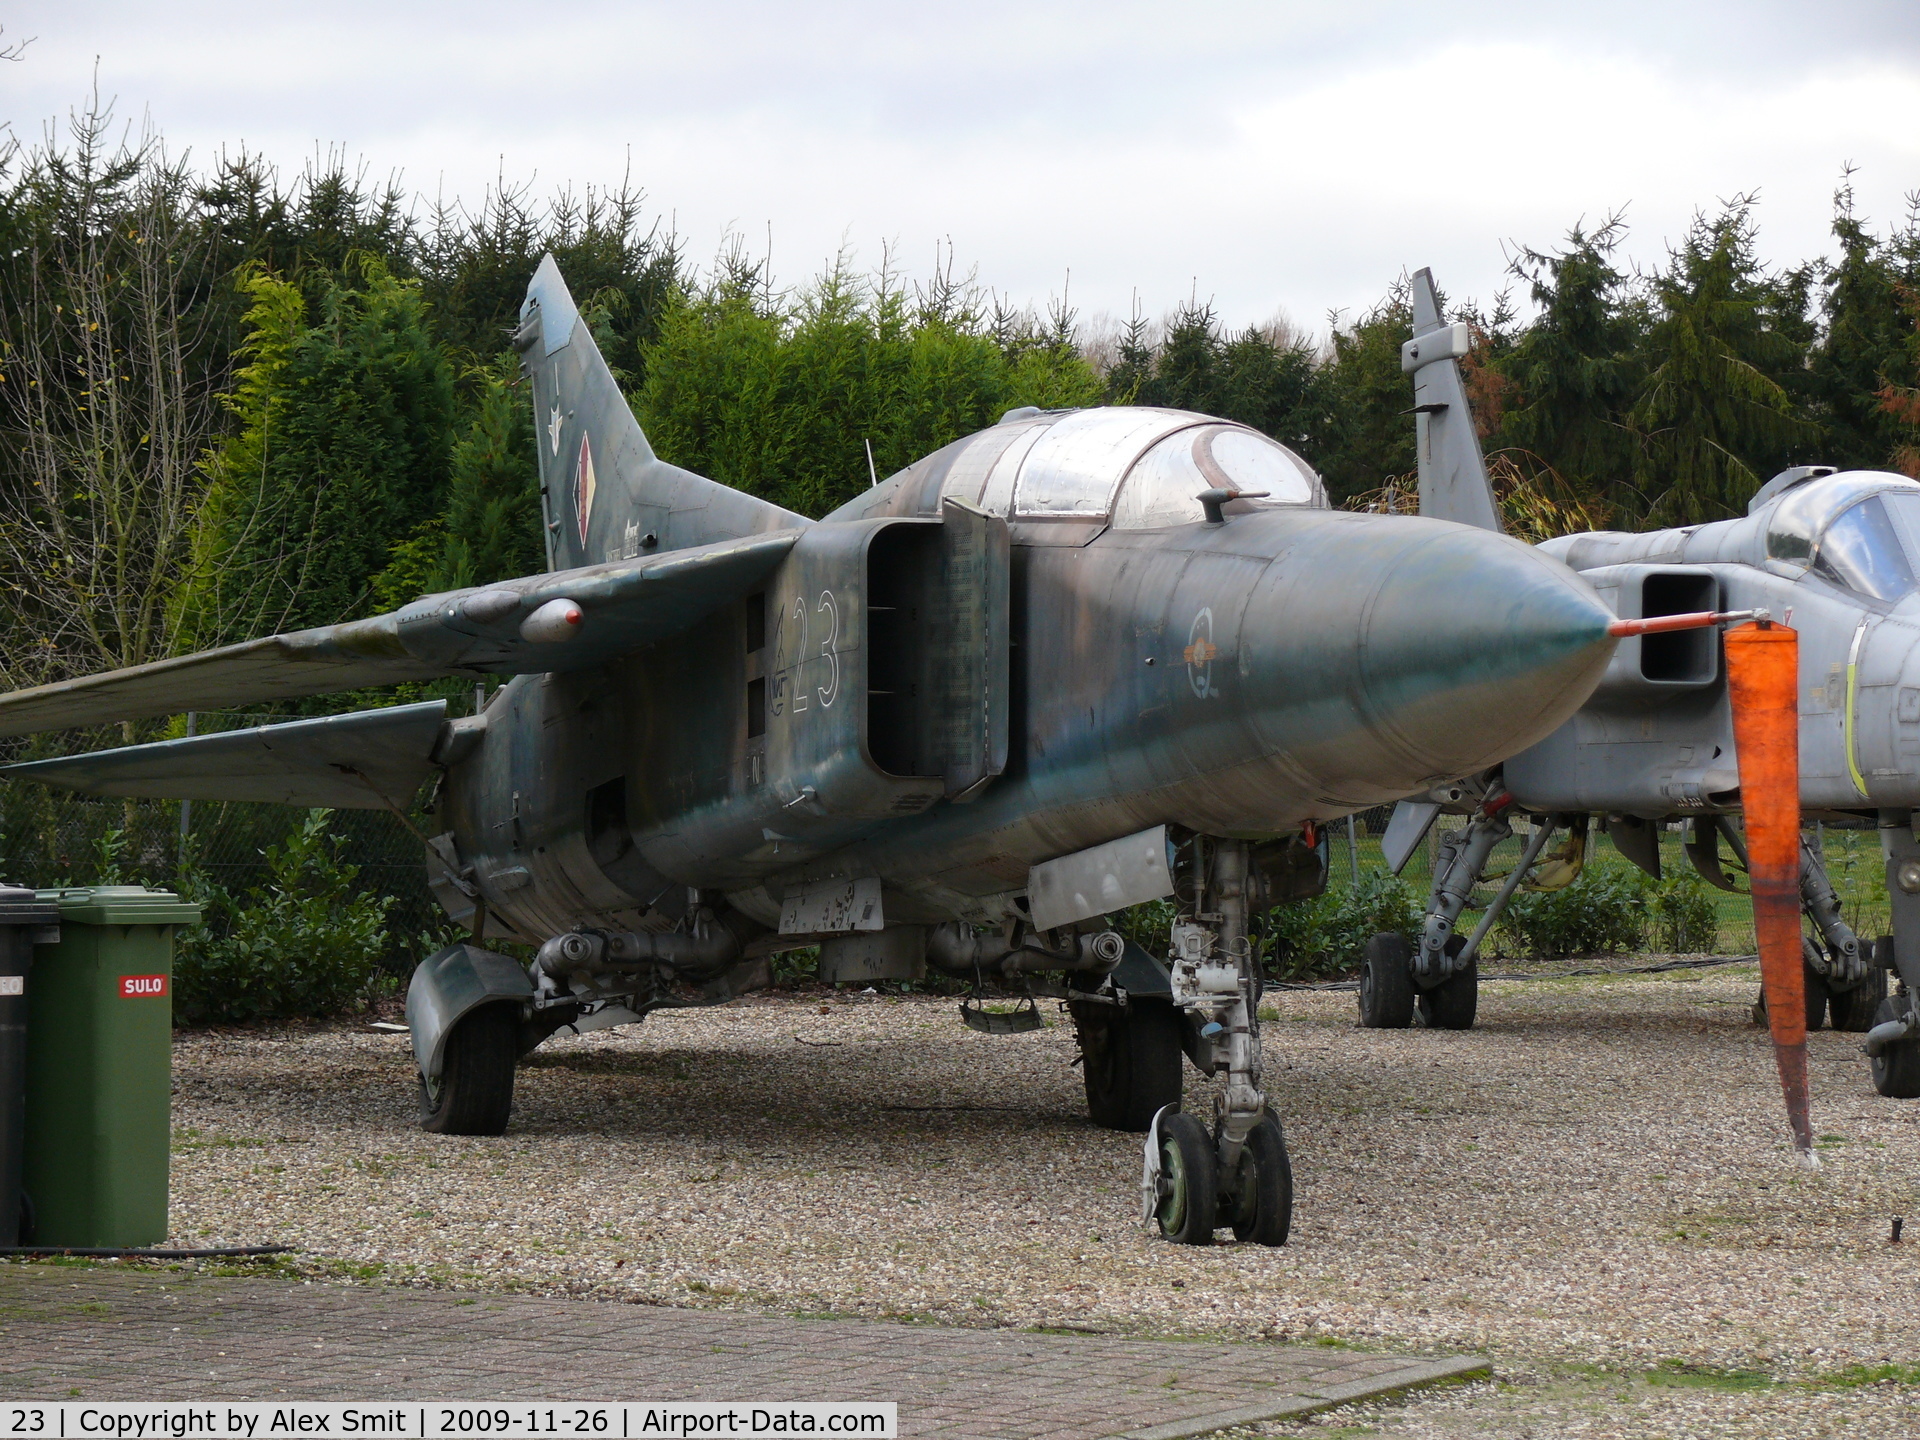 23, Mikoyan-Gurevich MiG-23UB C/N A1038504, Mikoyan Guerevich Mig23UB Flogger 23 East German Air Force of the PS Aero collection in Kessel (PH)